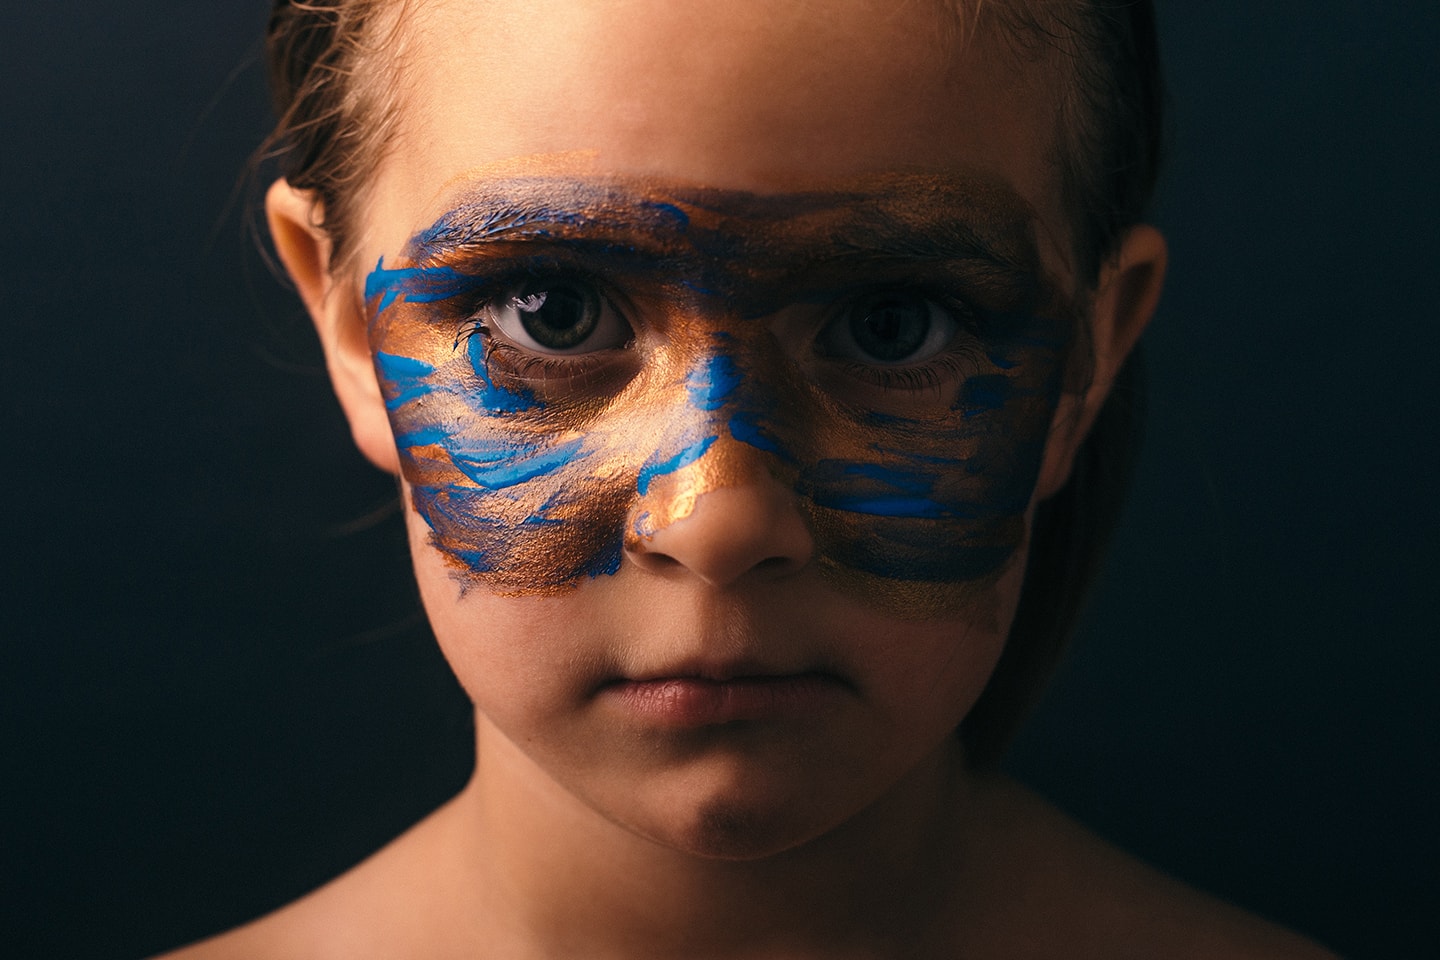 Head shot of Child with face paint